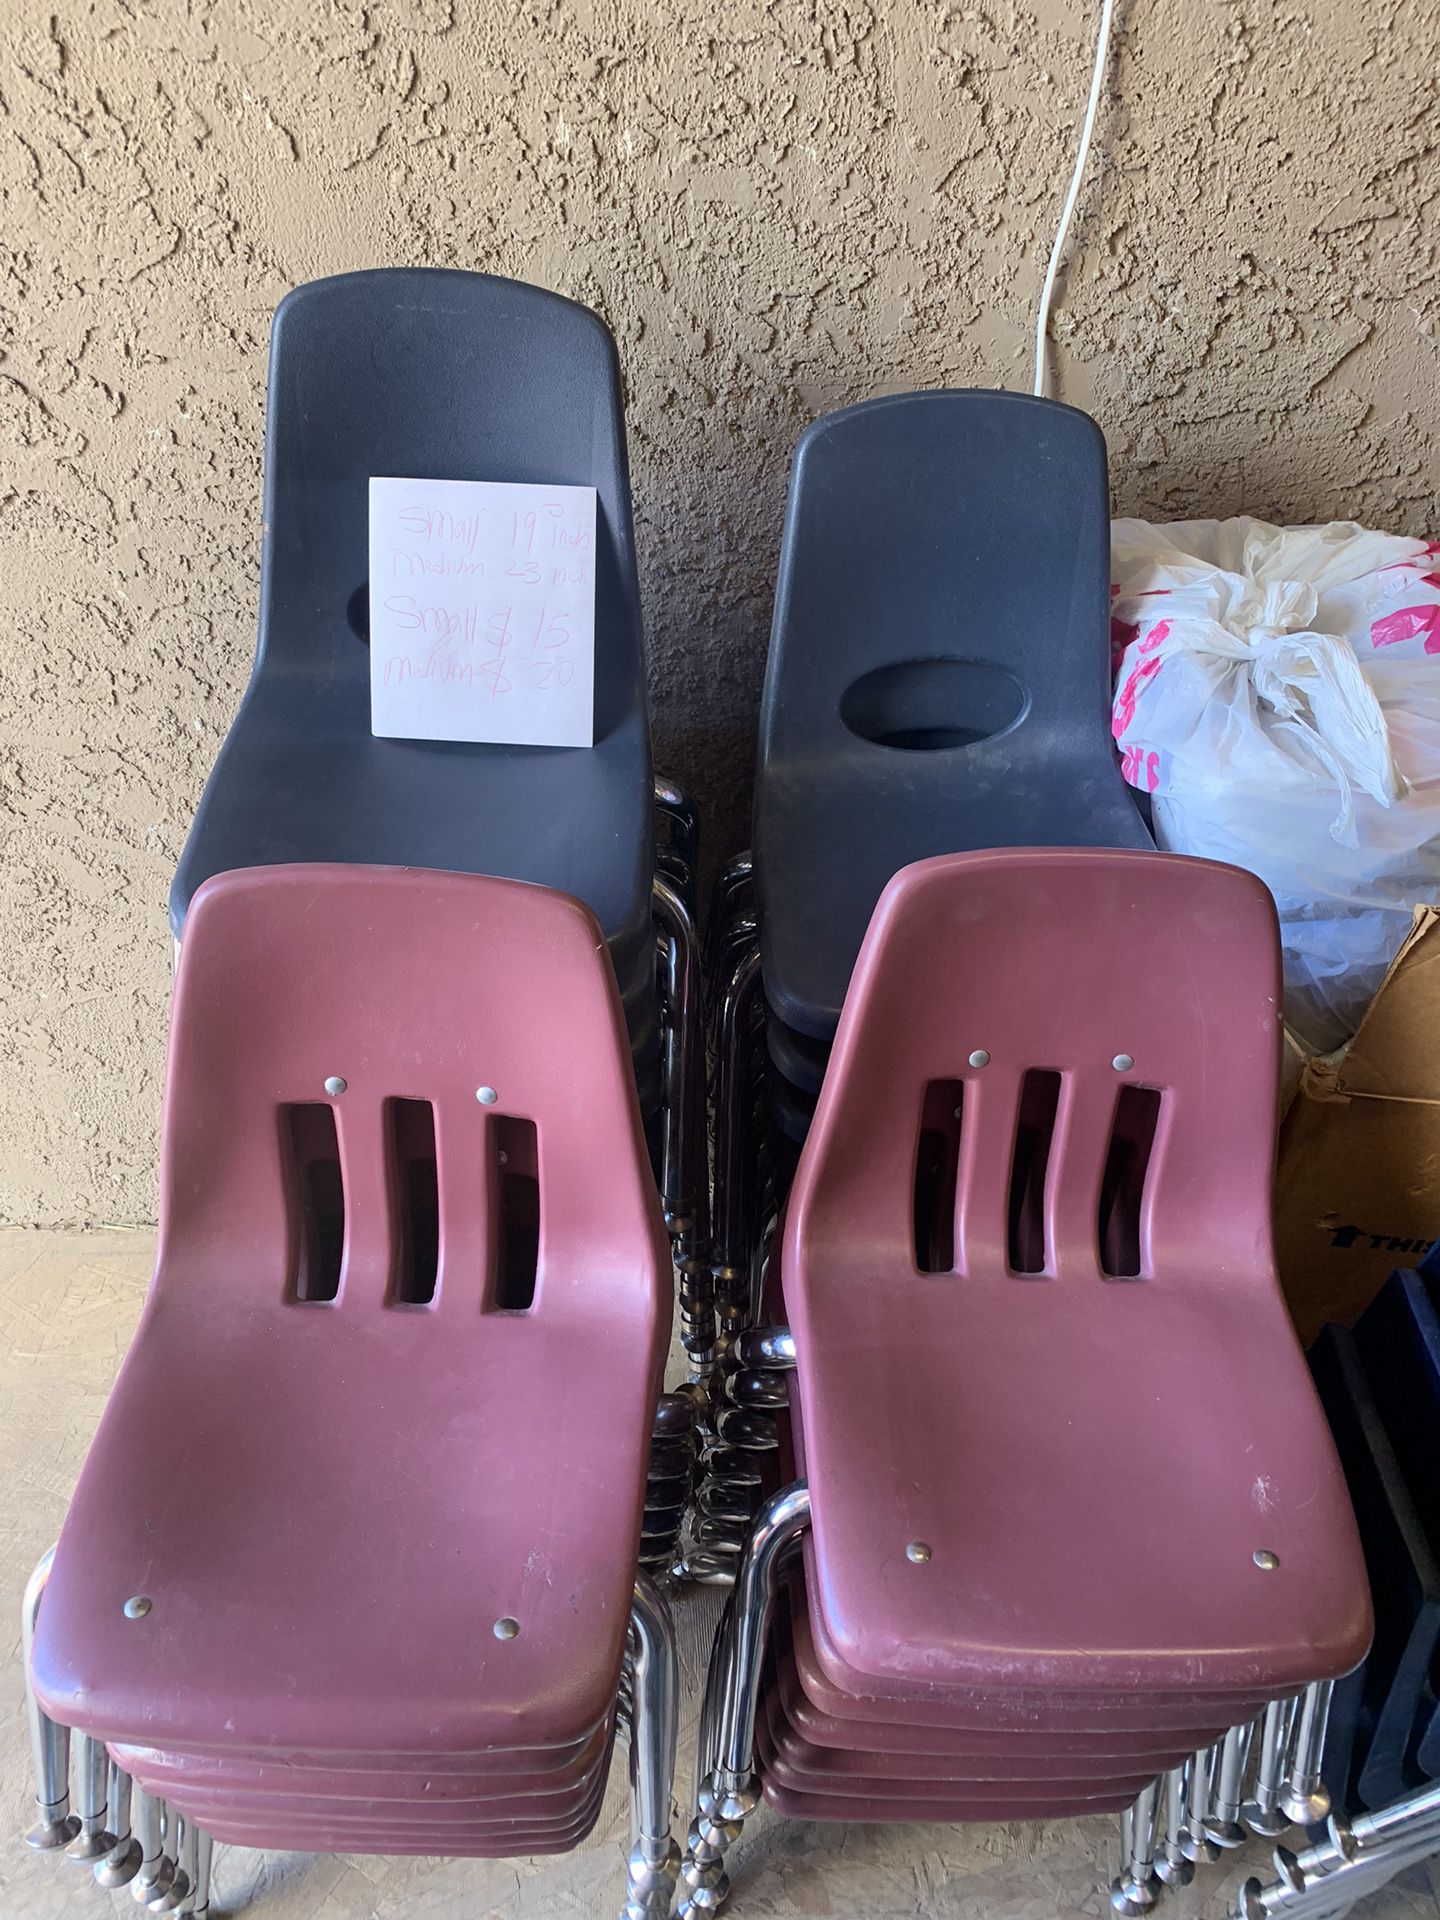 Small. Chairs. For. Kids. $15. Each